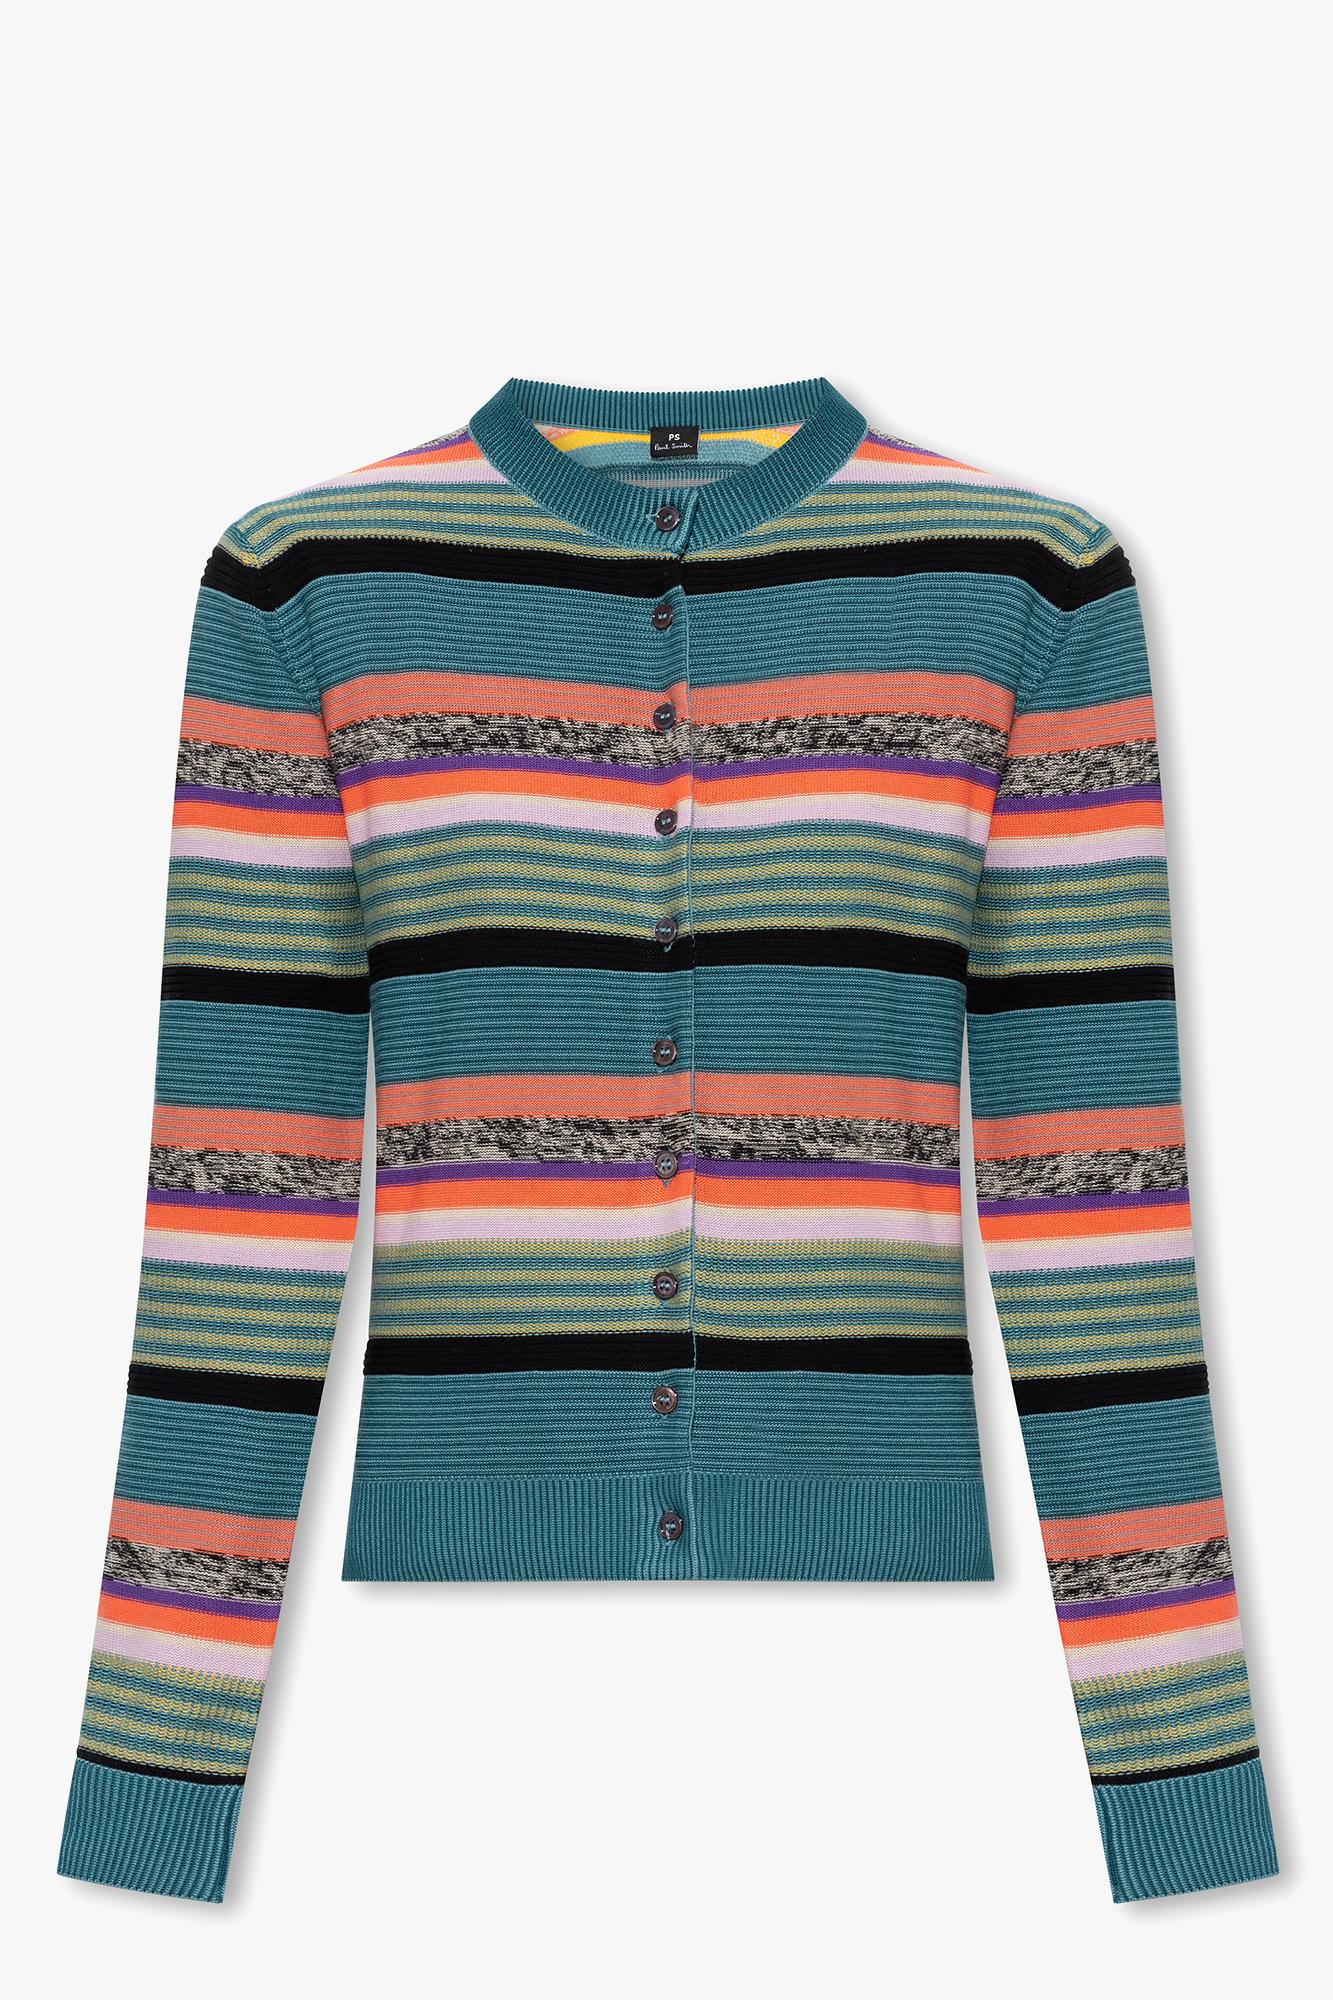 PS BY PAUL SMITH STRIPED SWEATER